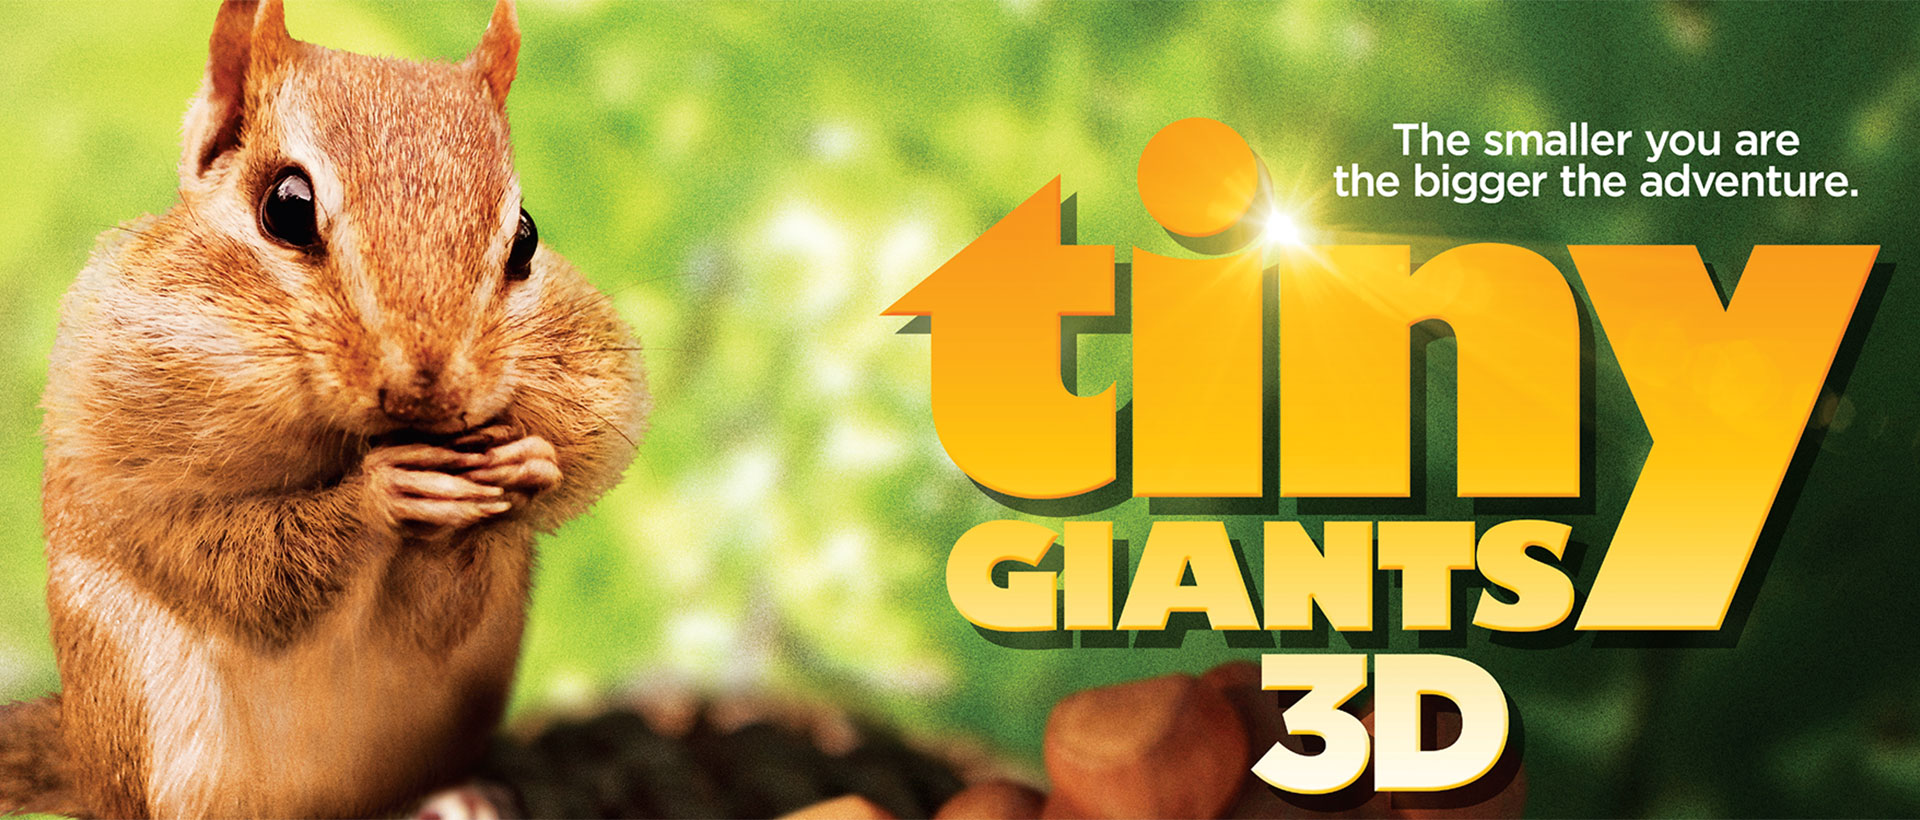 Image of a chipmunk with text that reads "The smaller you are, the bigger the adventure — tiny giants 3D"